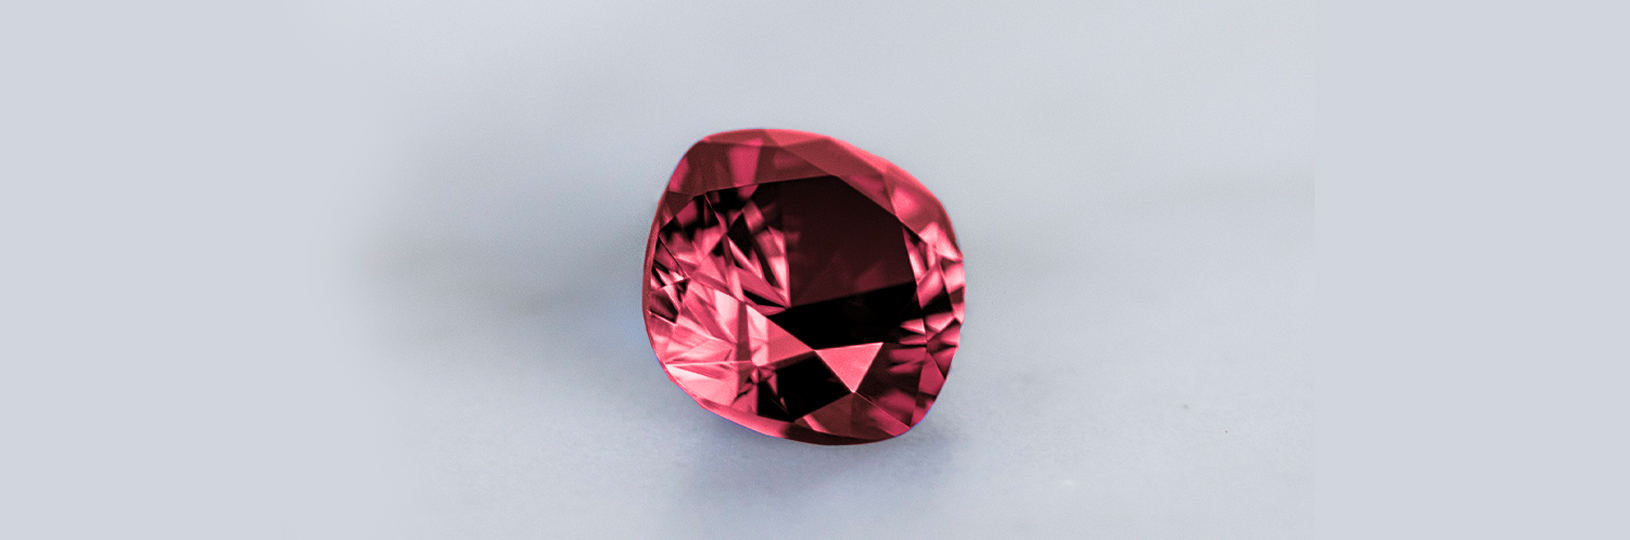 how are rubies formed